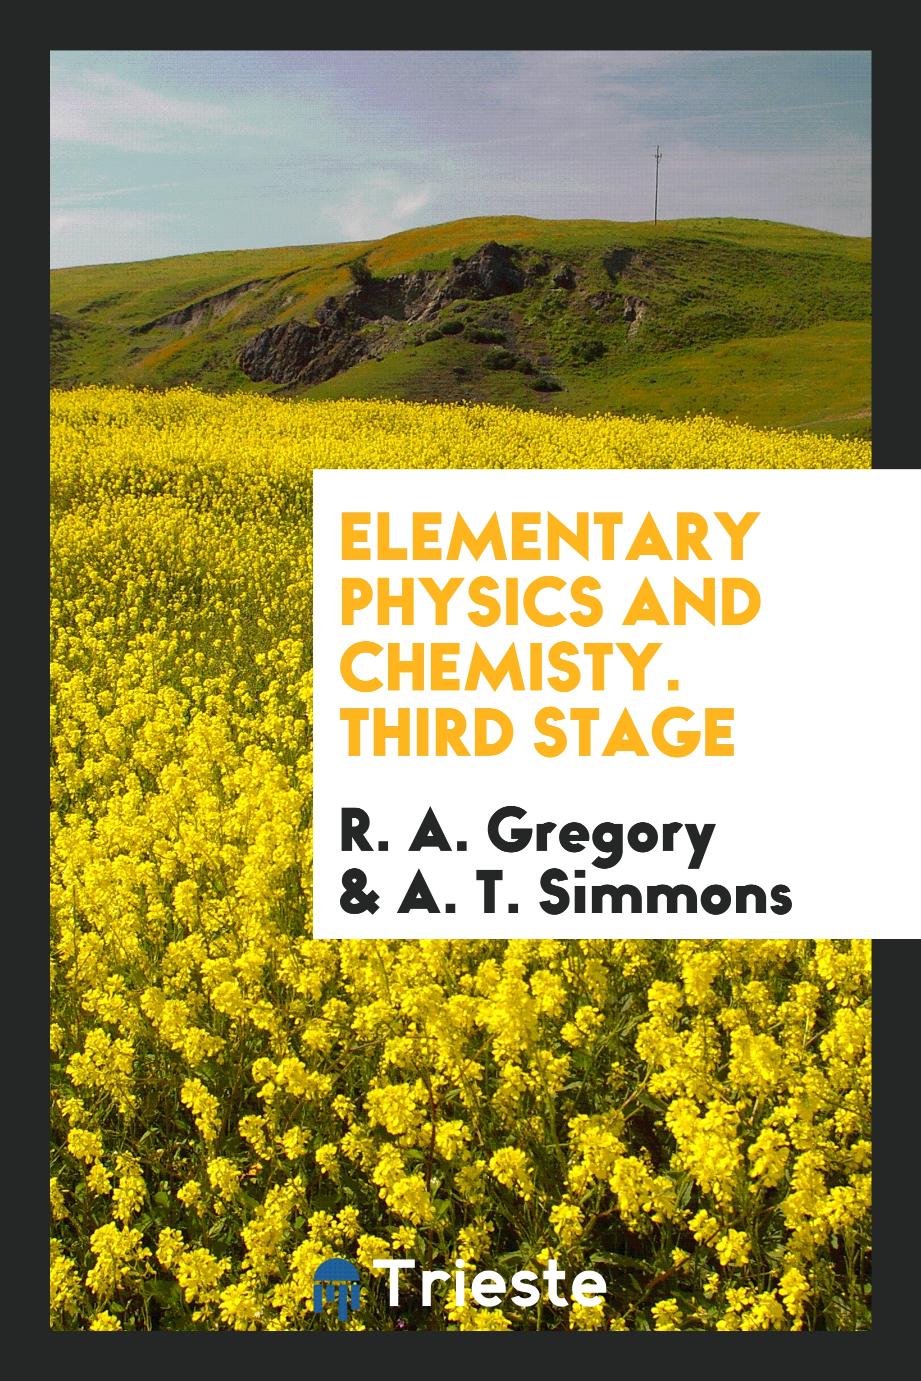 Elementary Physics and Chemisty. Third Stage